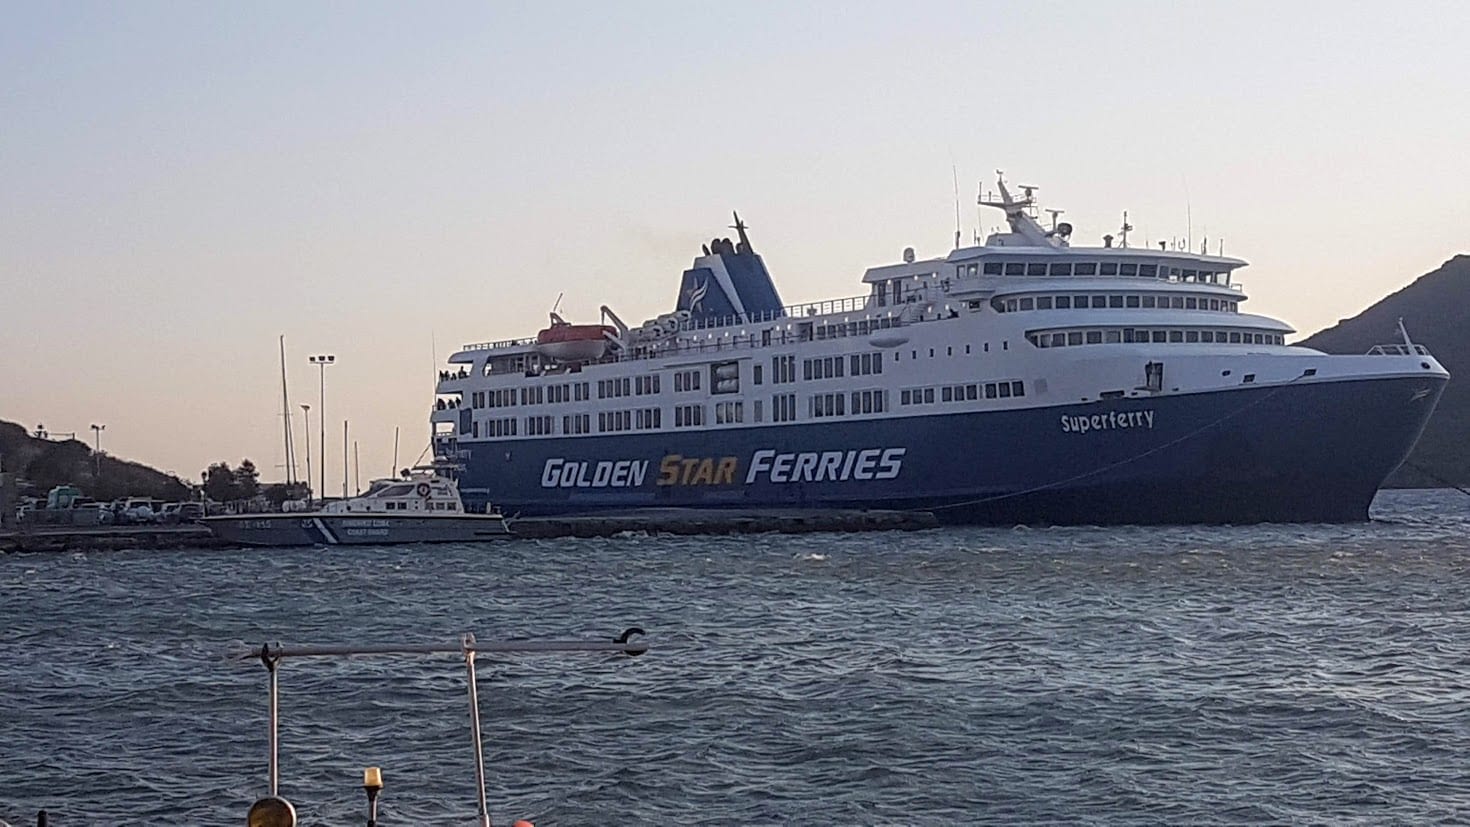 Golden star ferries sail from Rafina in Athens